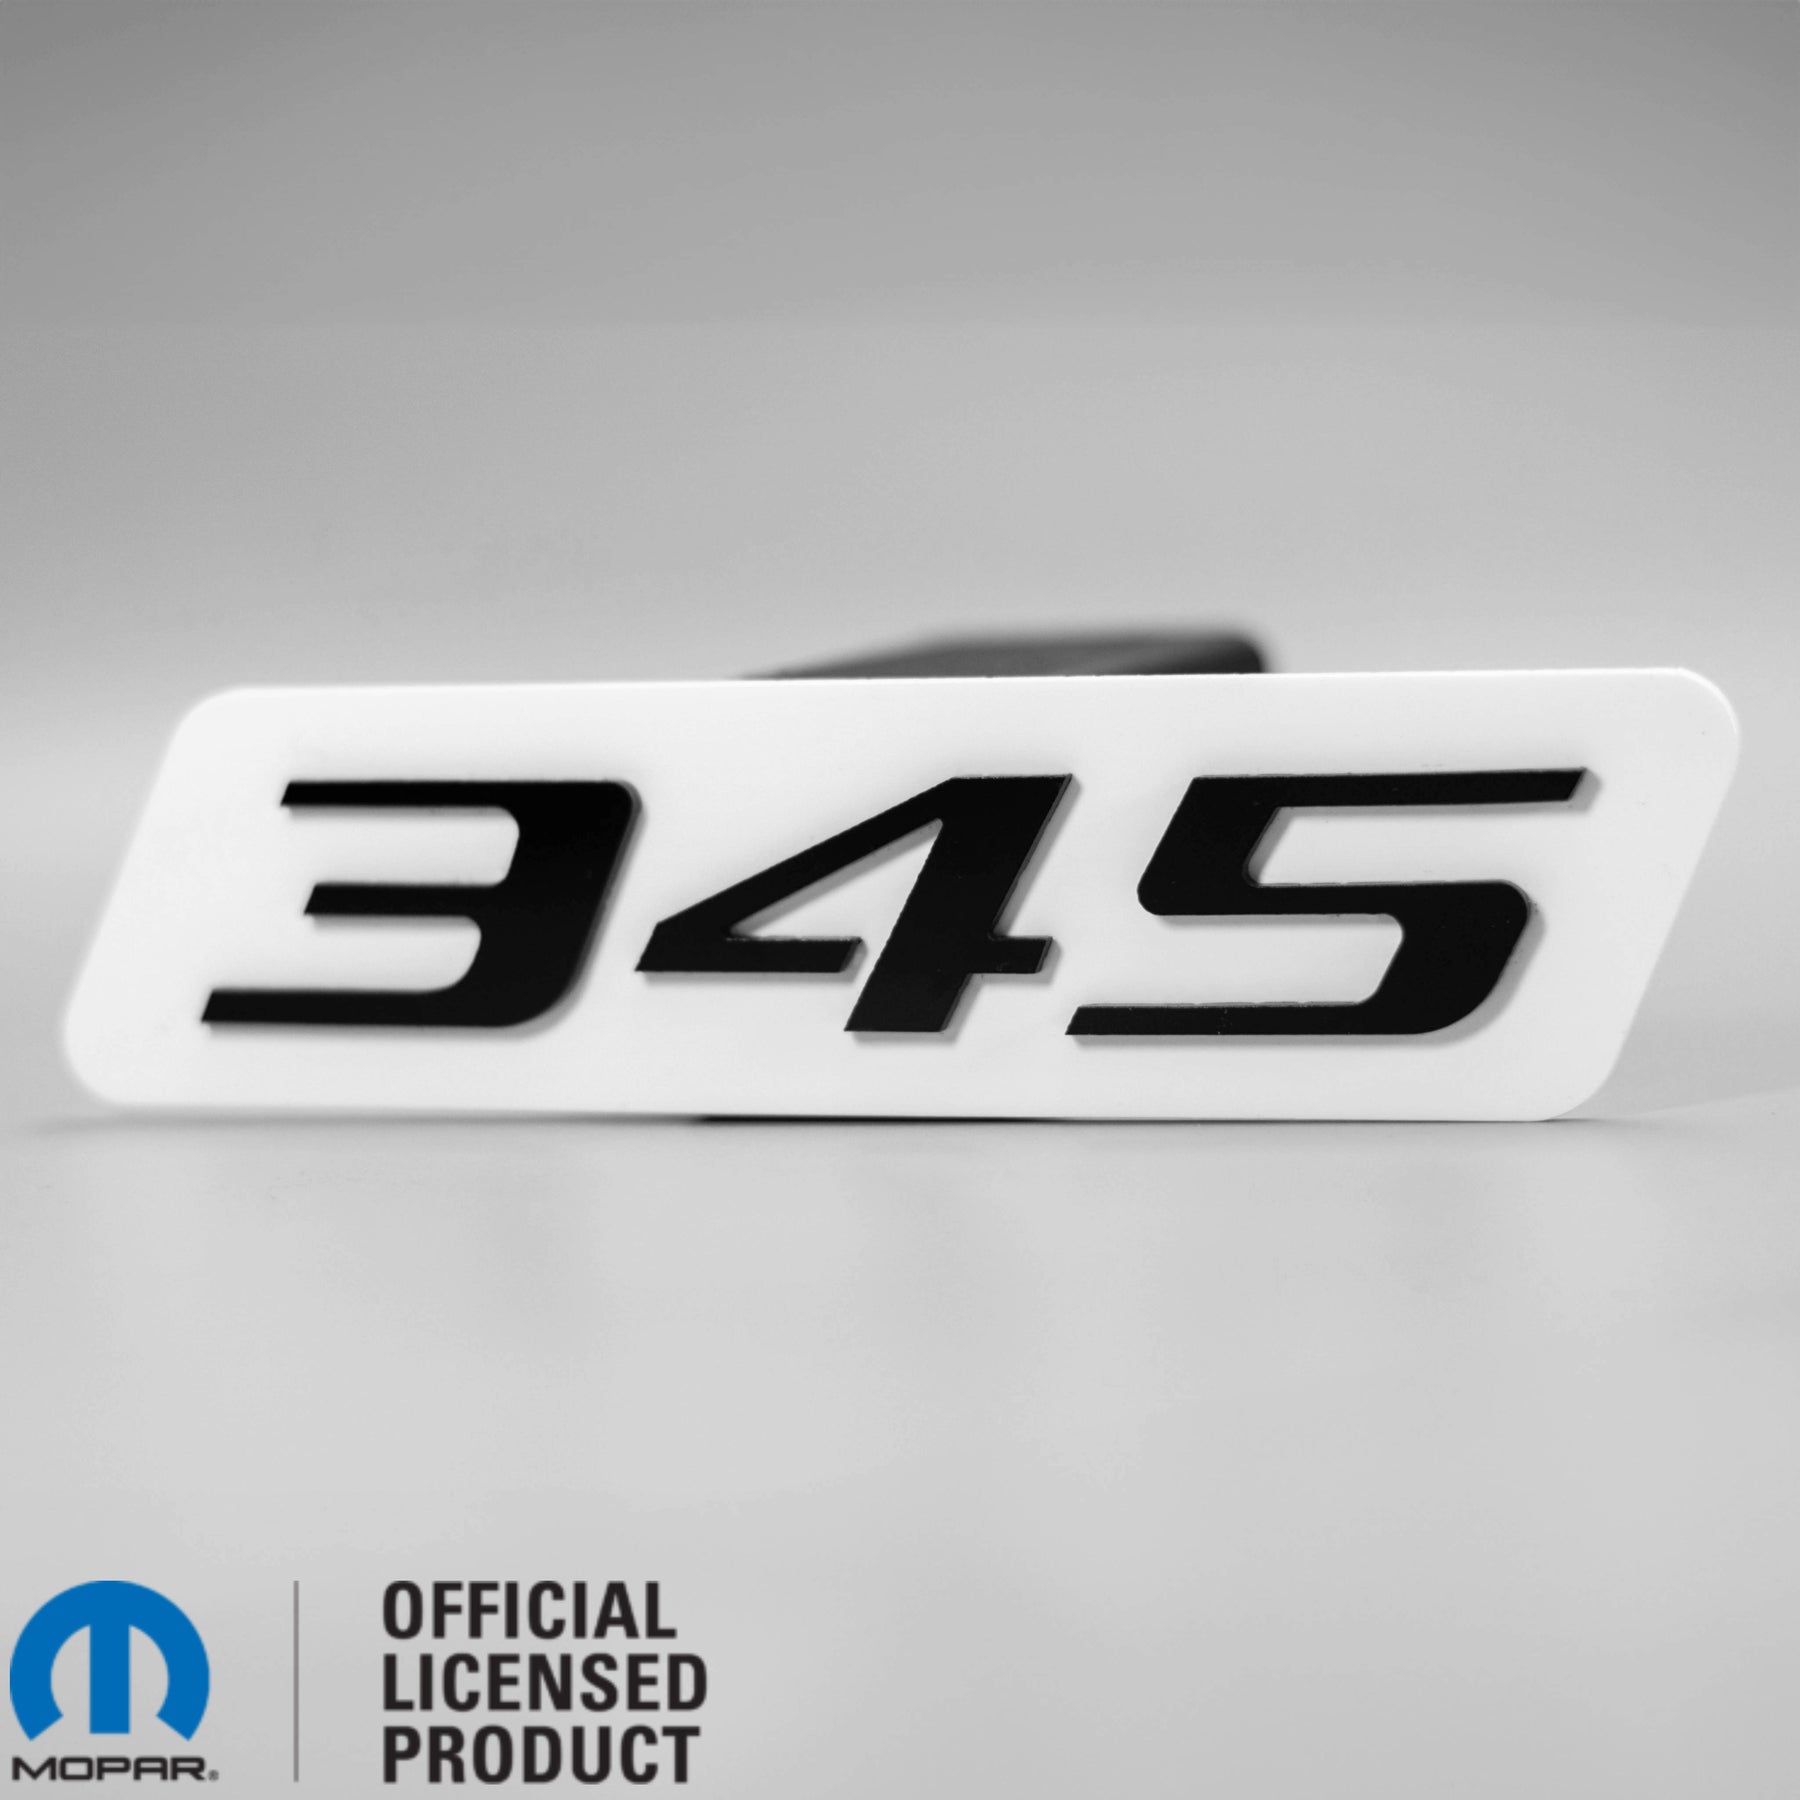 345® - HITCH COVER - Officially Licensed Product